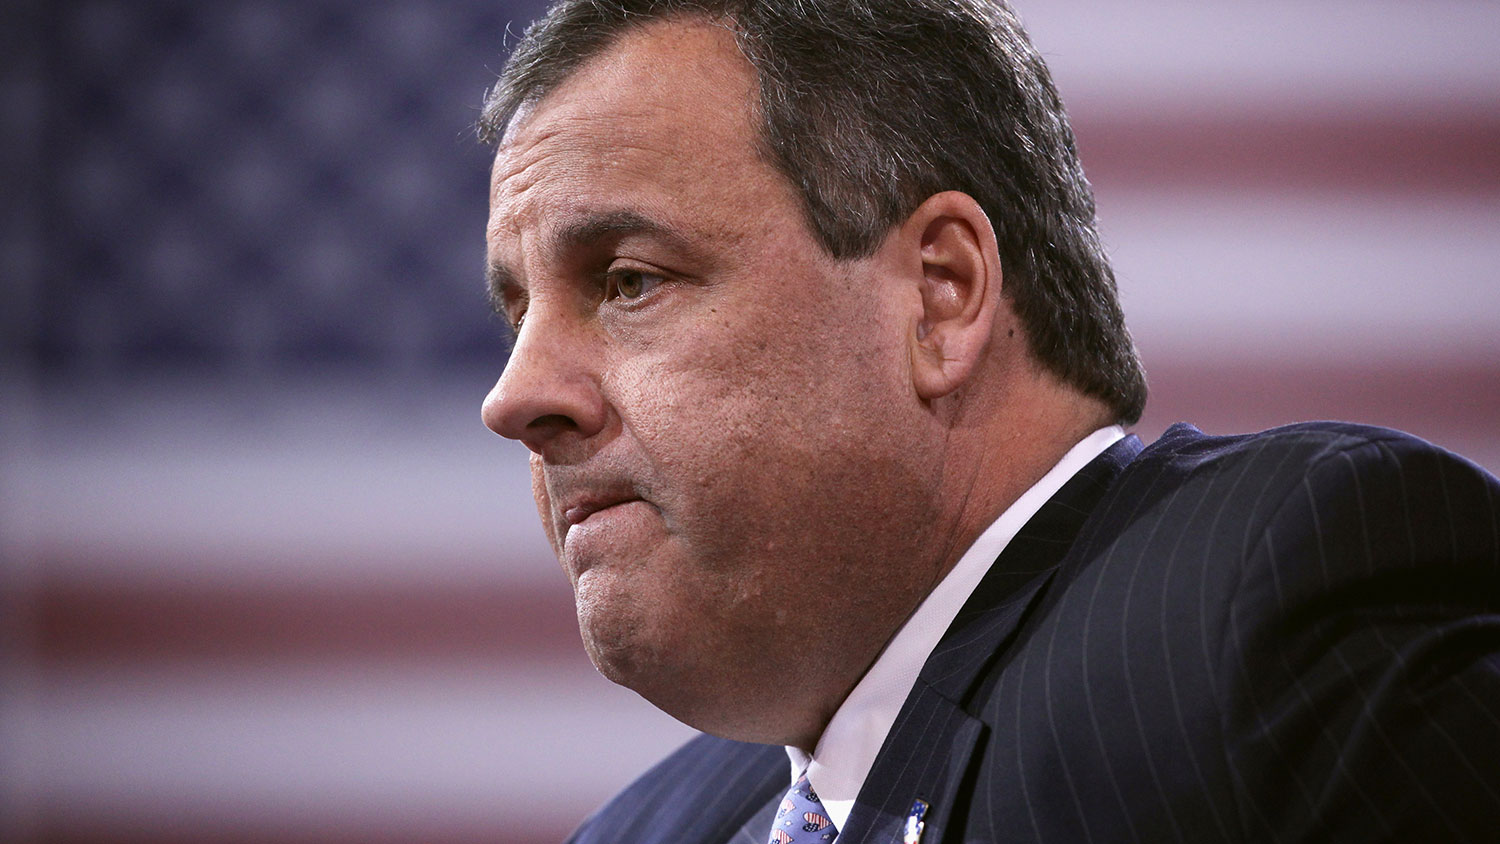 New Jersey Governor Chris Christie pauses as he participates in a discussion during the 42nd annual Conservative Political Action Conference (CPAC) February 26, 2015 in National Harbor, Maryland.
